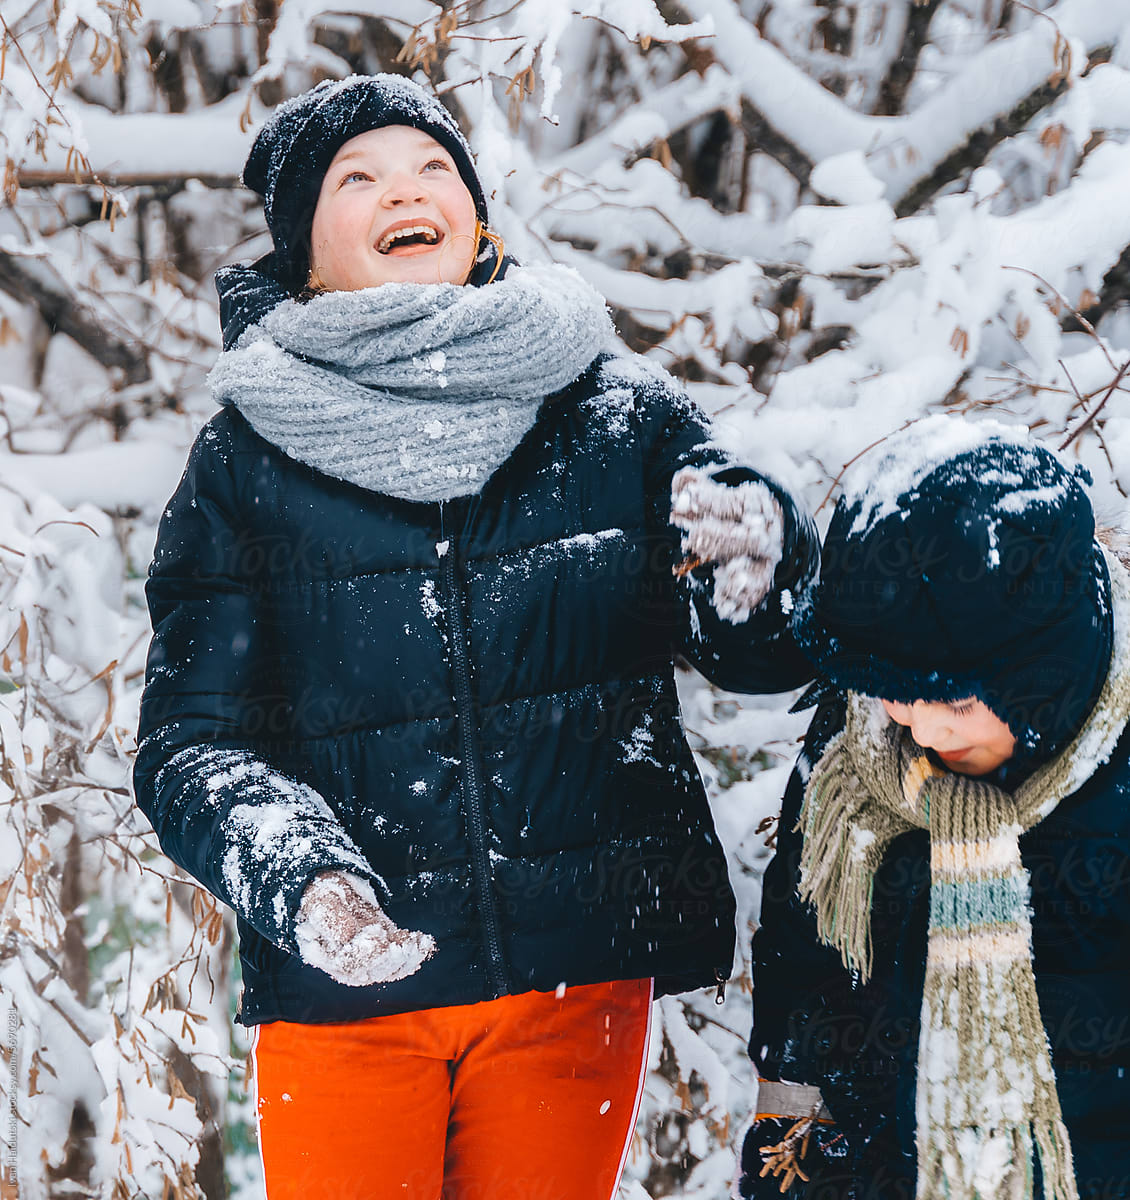 Smiling girl playfully shakes snow on brother\'s head in snowy forest